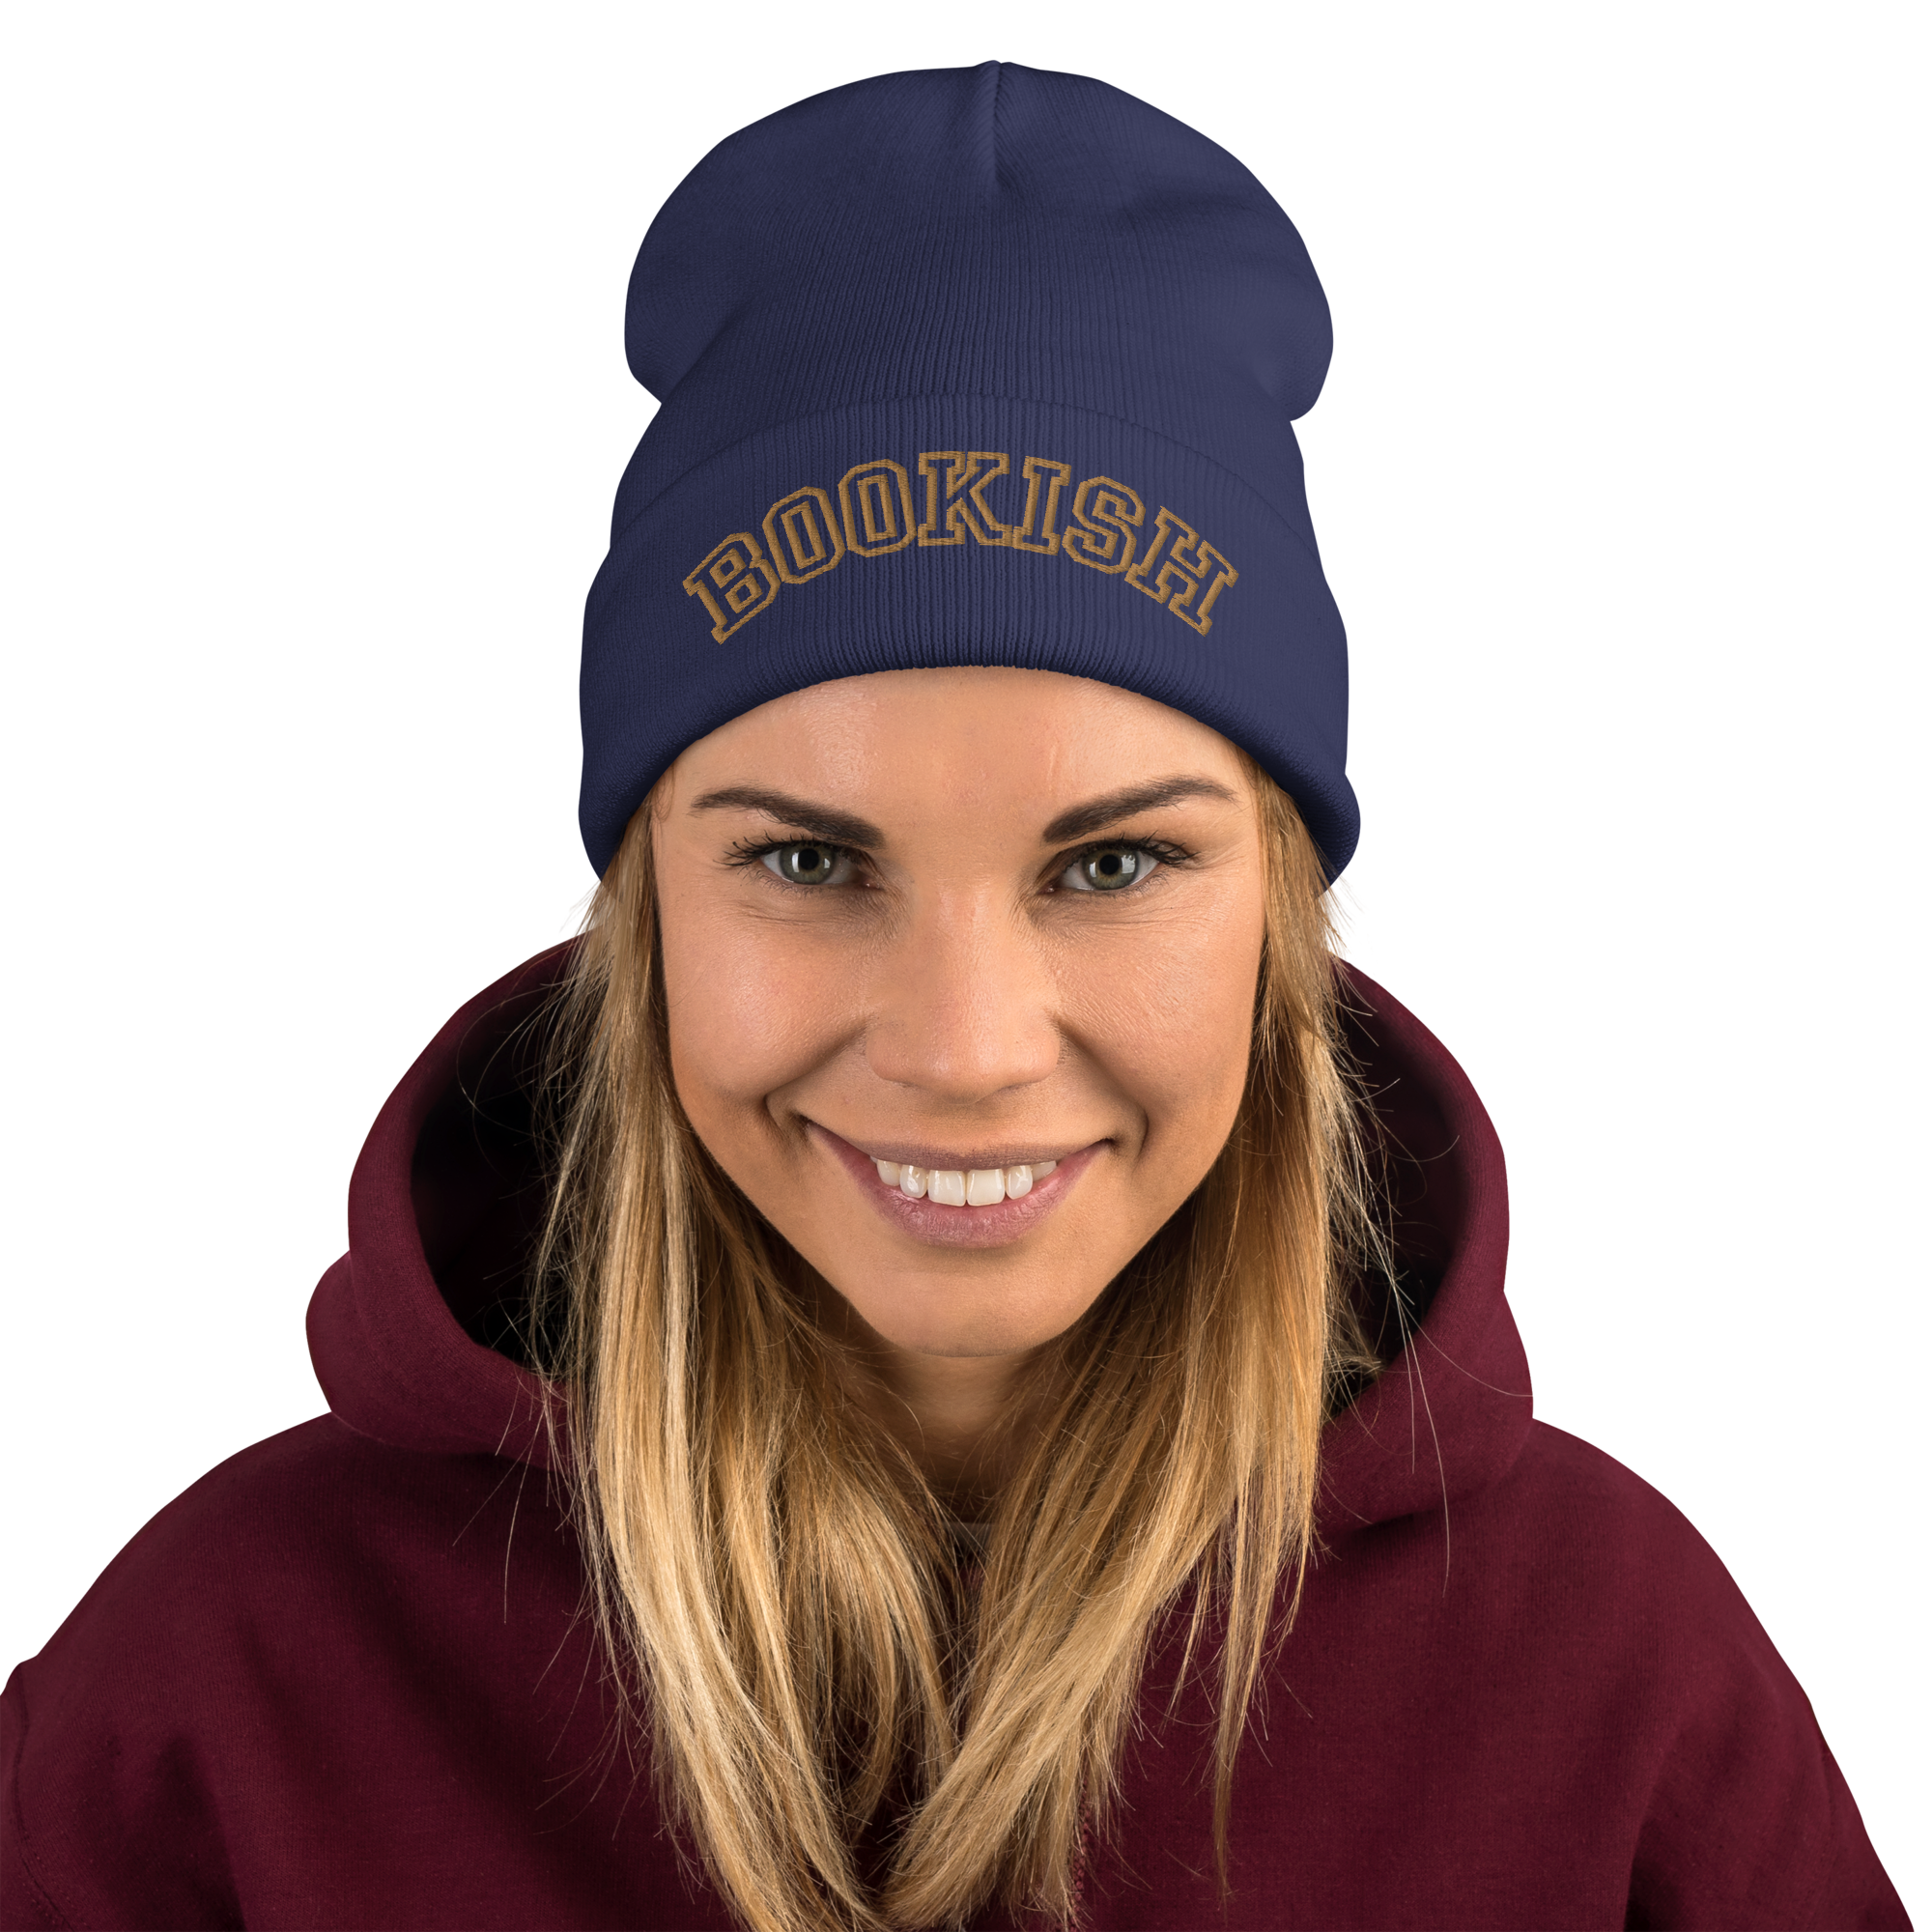 BOOKISH beanie comes in many colors